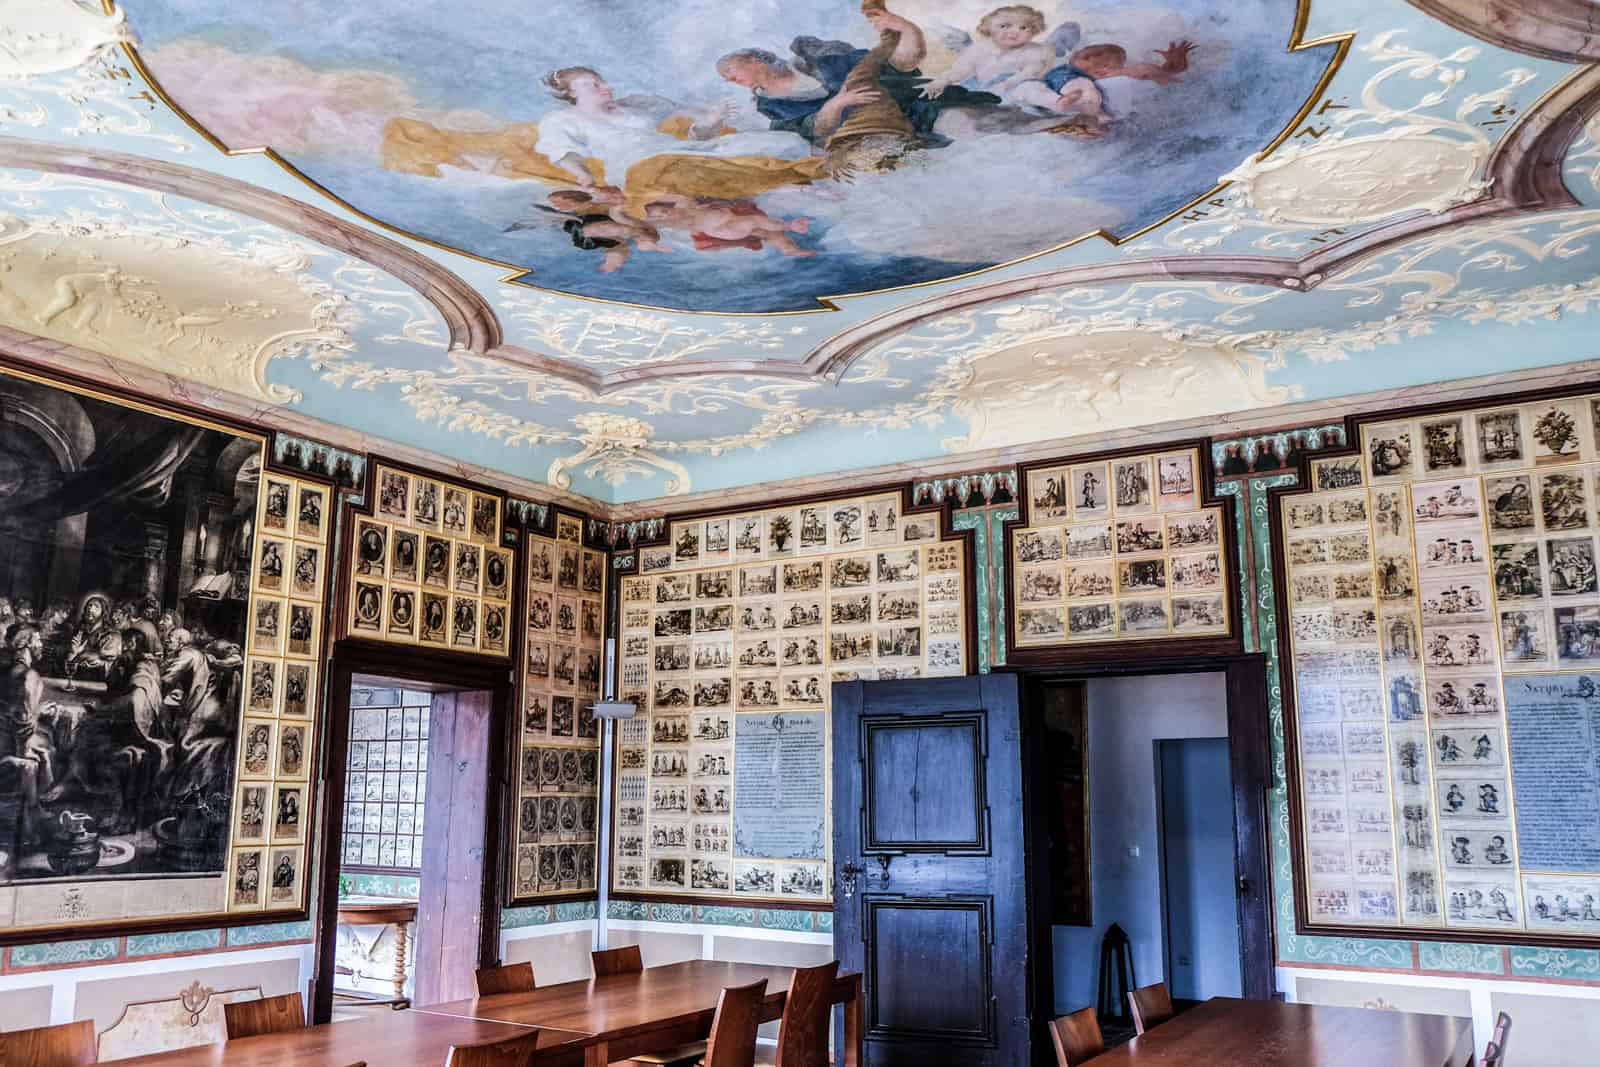 the painting mural ceiling and walls full of old black and white photographs inside the Domäne Wachau winery Cellar Palace